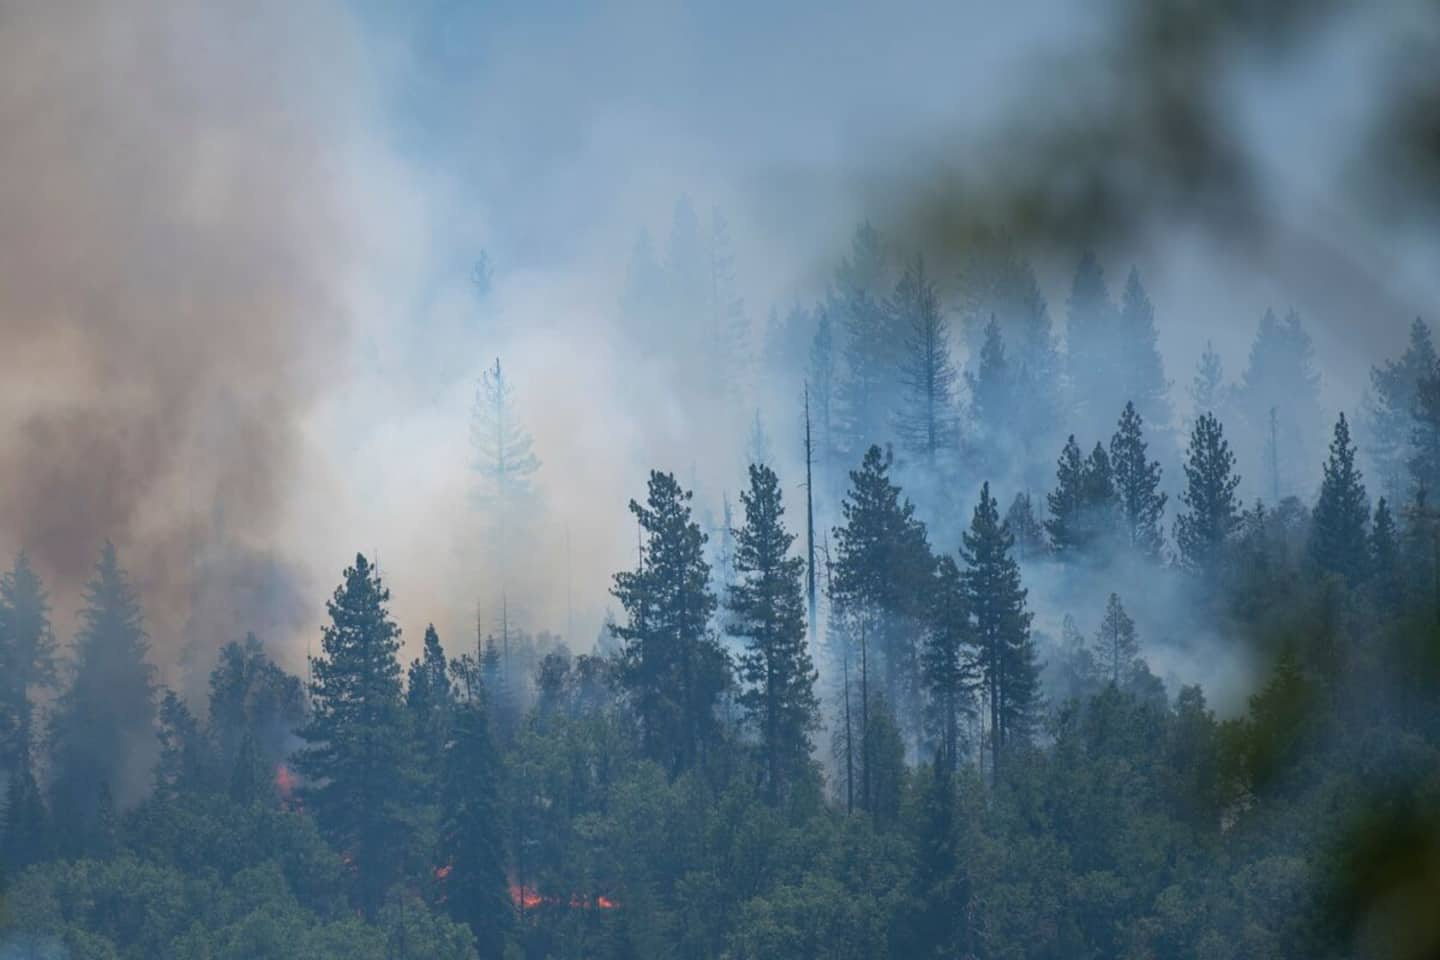 Yosemite's giant sequoias were spared the flames